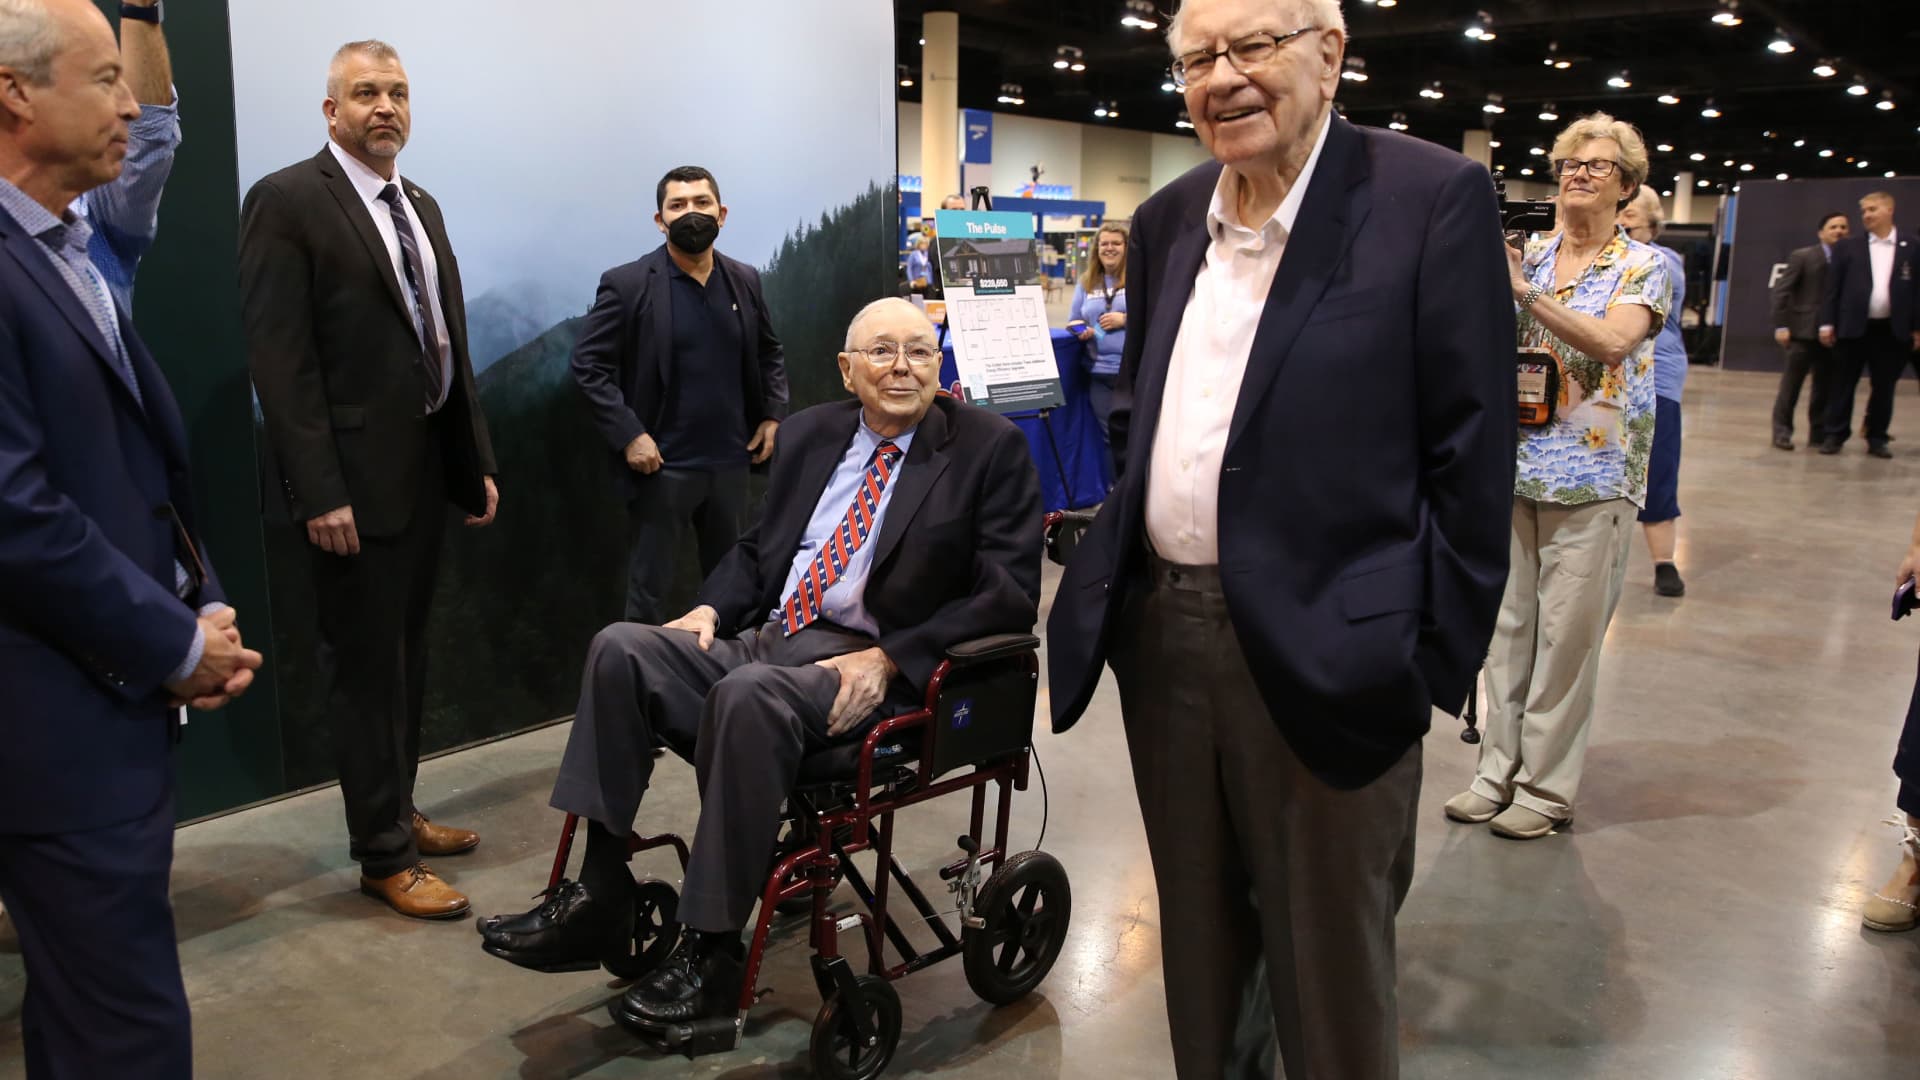 Berkshire Hathaway’s annual meeting: Follow all the action as Warren Buffett takes the stage – CNBC